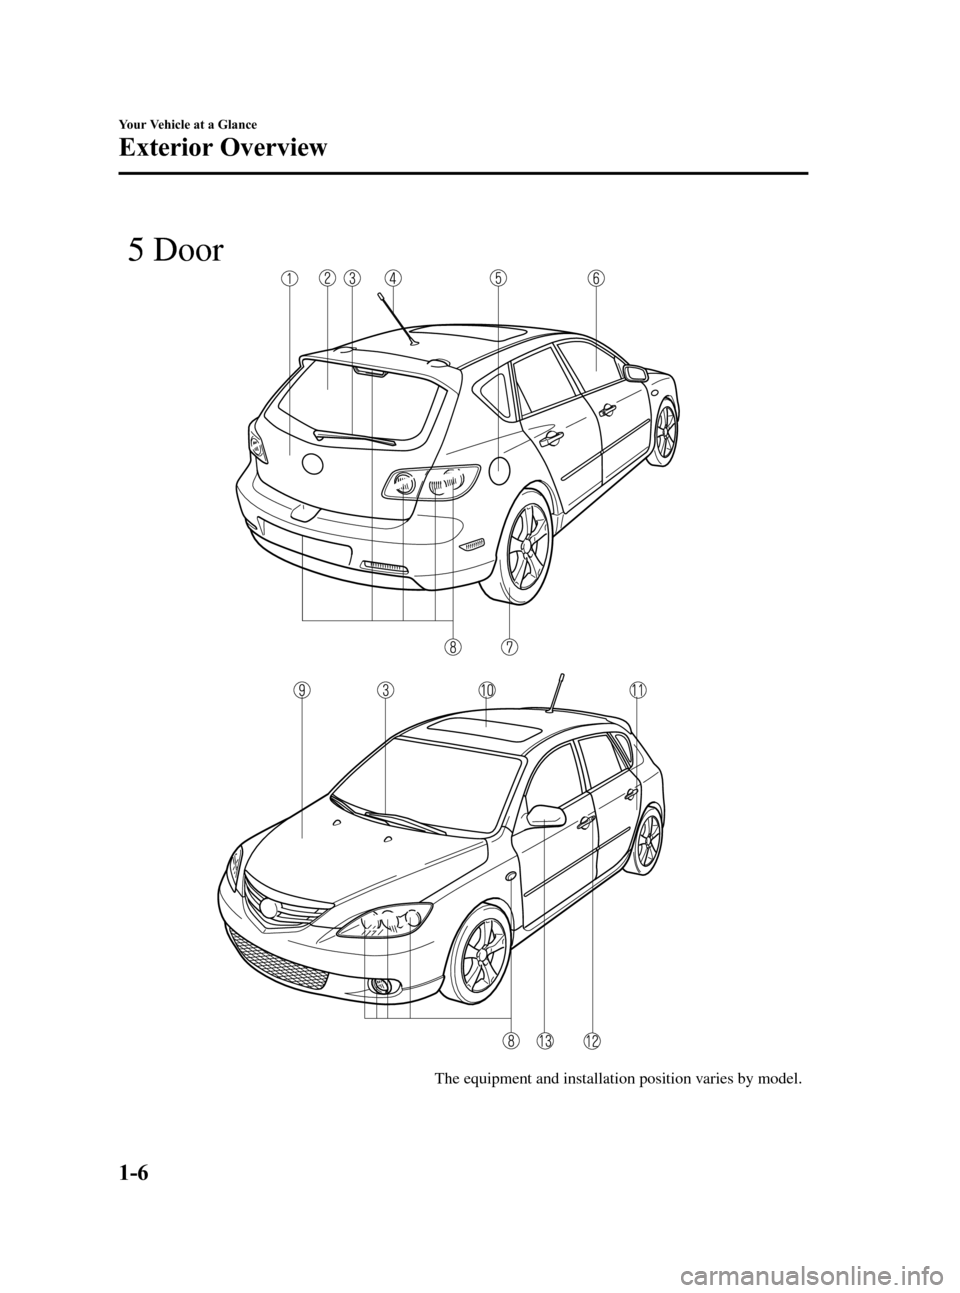 MAZDA MODEL 3 HATCHBACK 2006   (in English) User Guide Black plate (12,1)
The equipment and installation position varies by model.
 5 Door
1-6
Your Vehicle at a Glance
Exterior Overview
Mazda3_8U55-EA-05G_Edition2 Page12
Thursday, June 23 2005 2:52 PM
For